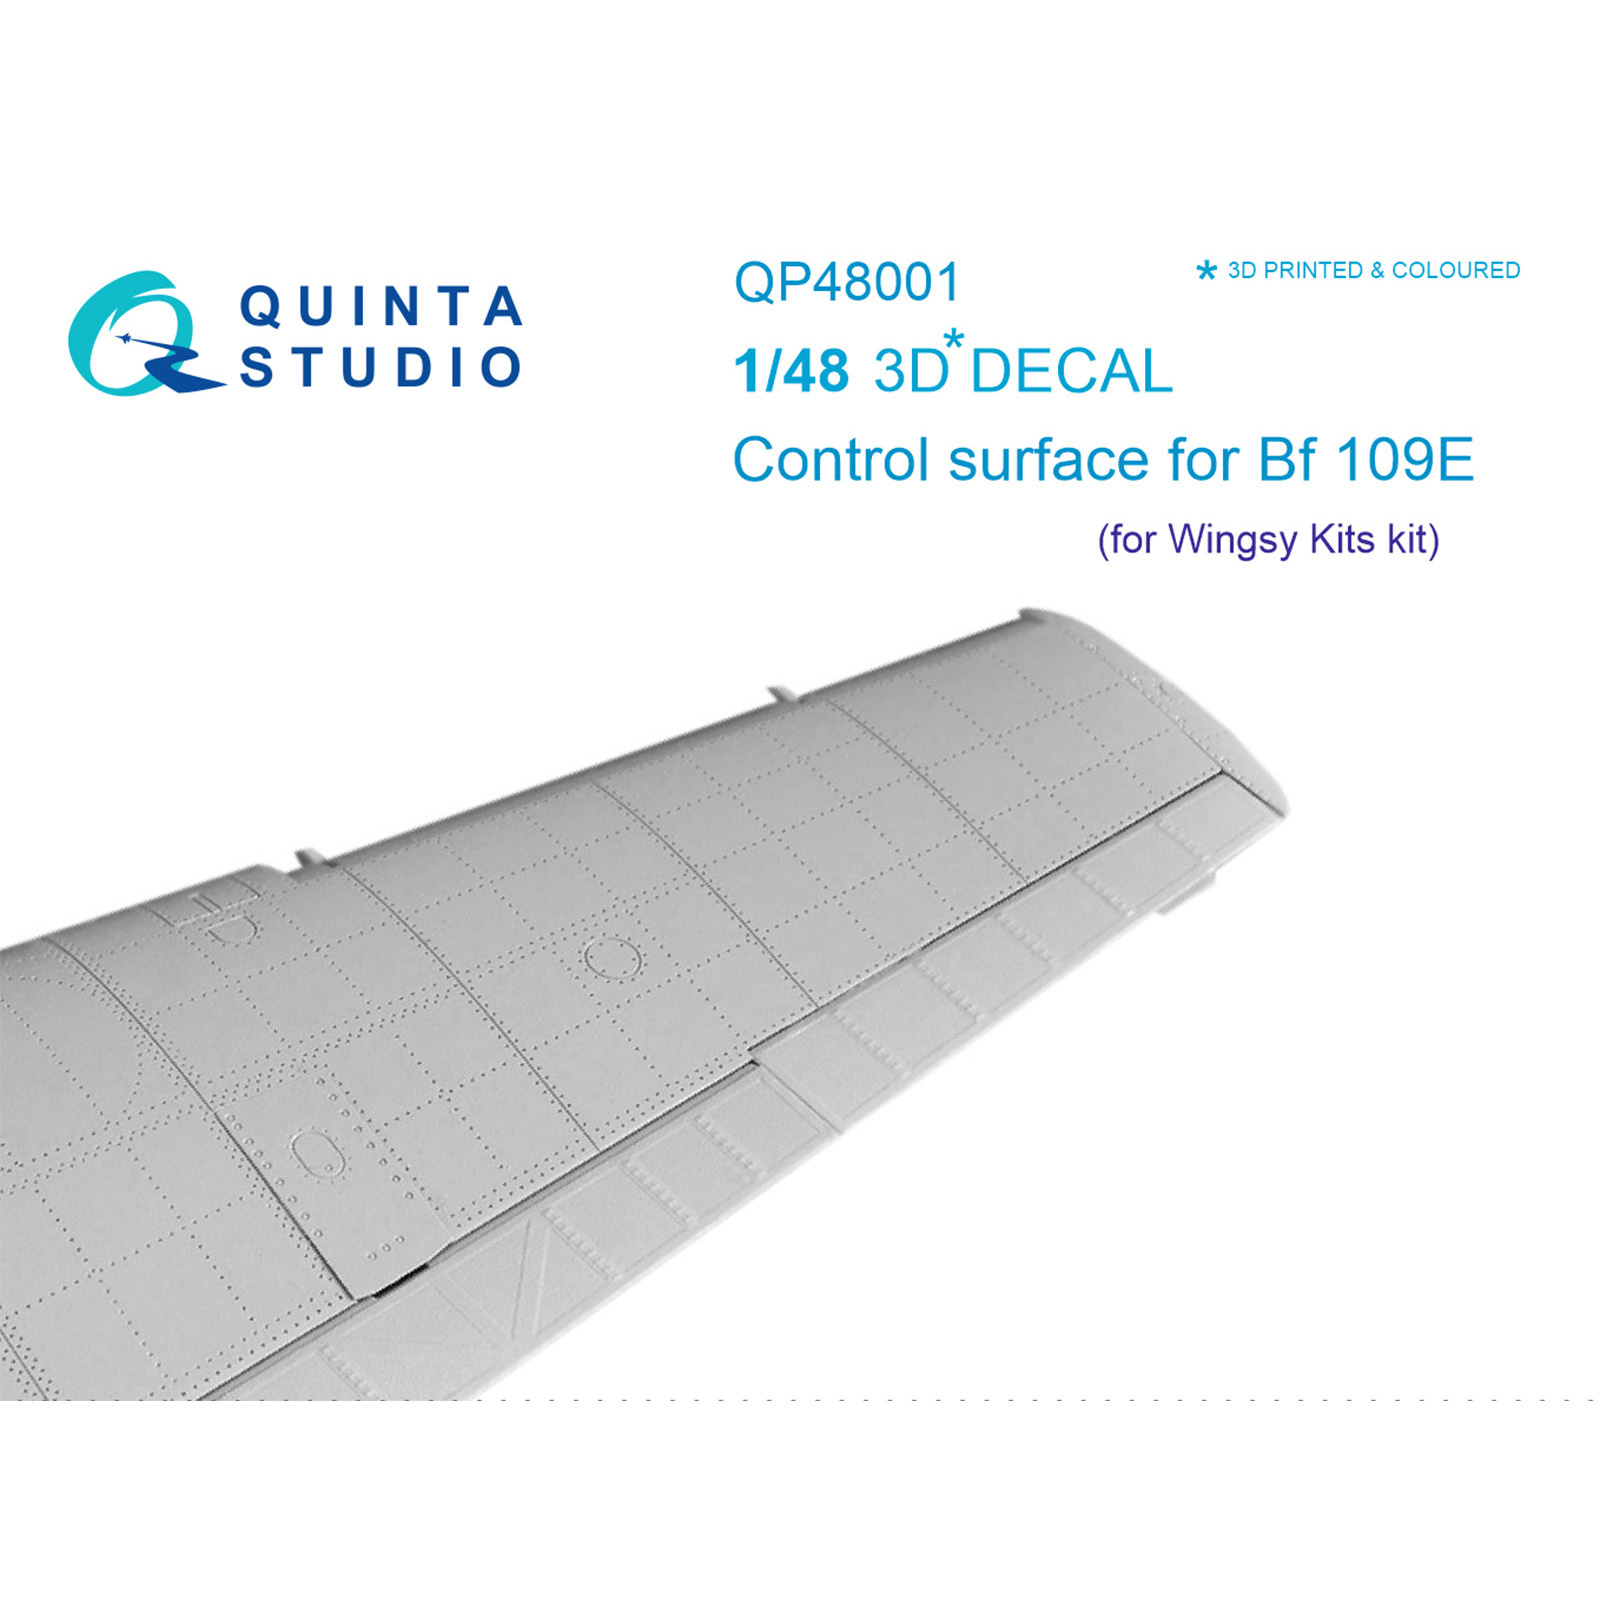 QP48001 Quinta Studio 1/48 Steering Surfaces for Bf 109E (for Wingsy Kits model)